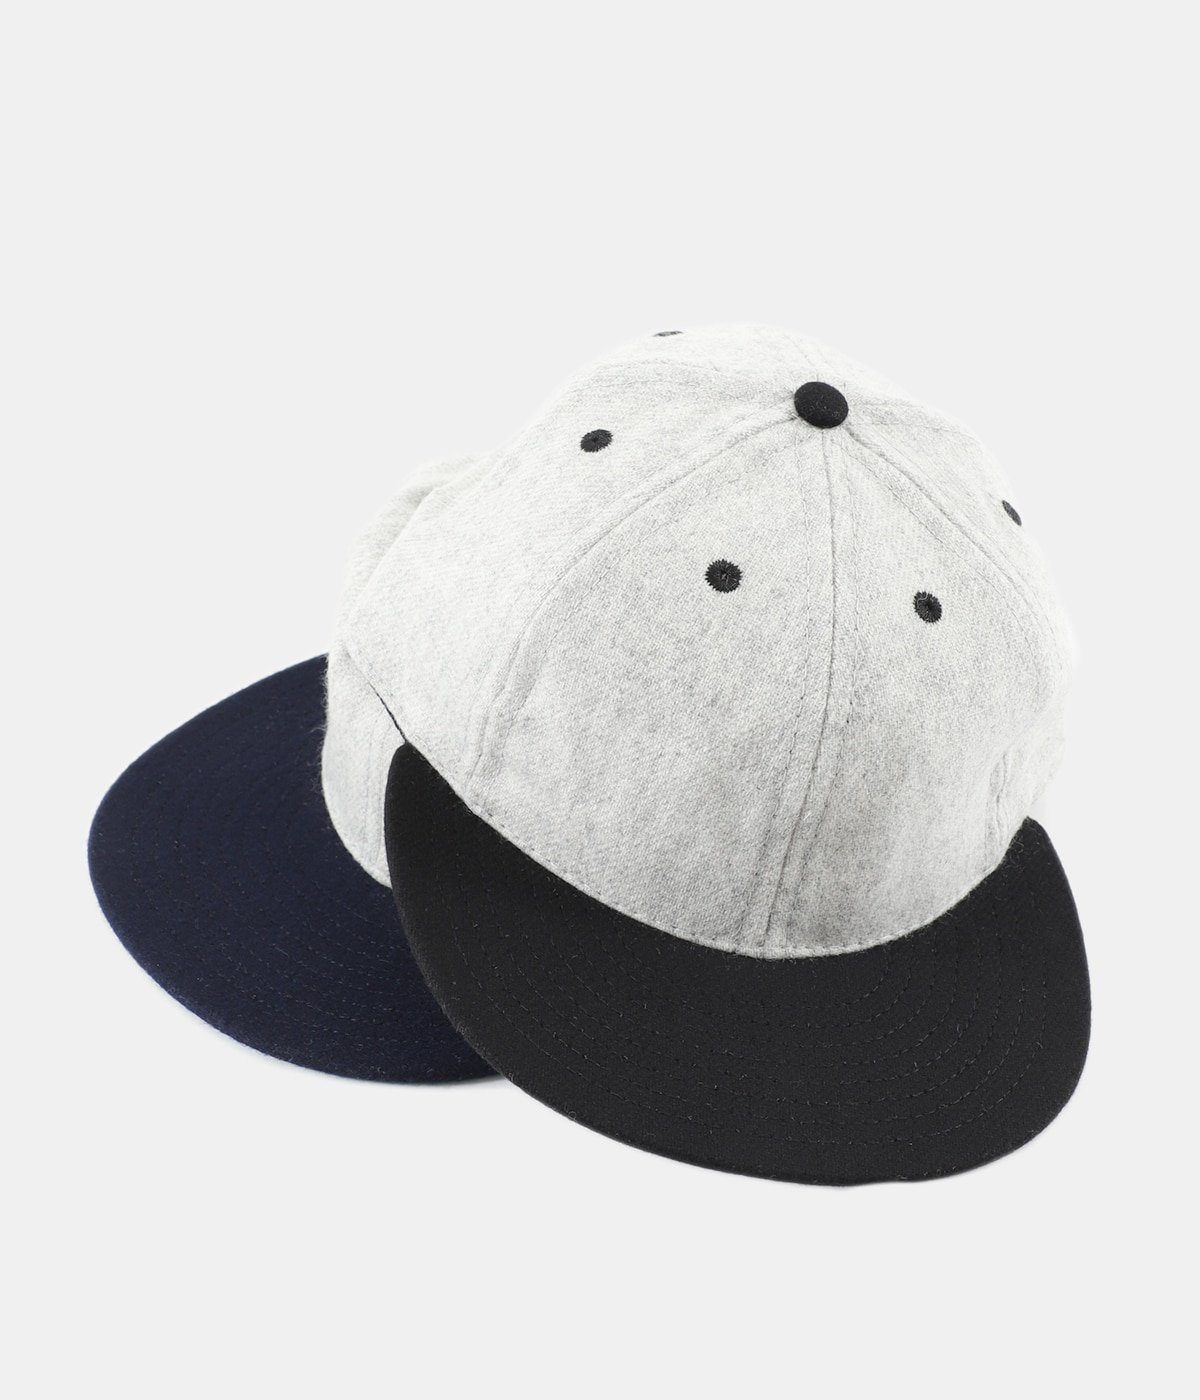 ONLY ARK】別注 COOPERS TOWN WOOL BB CAP | COOPERSTOWN BALL CAP